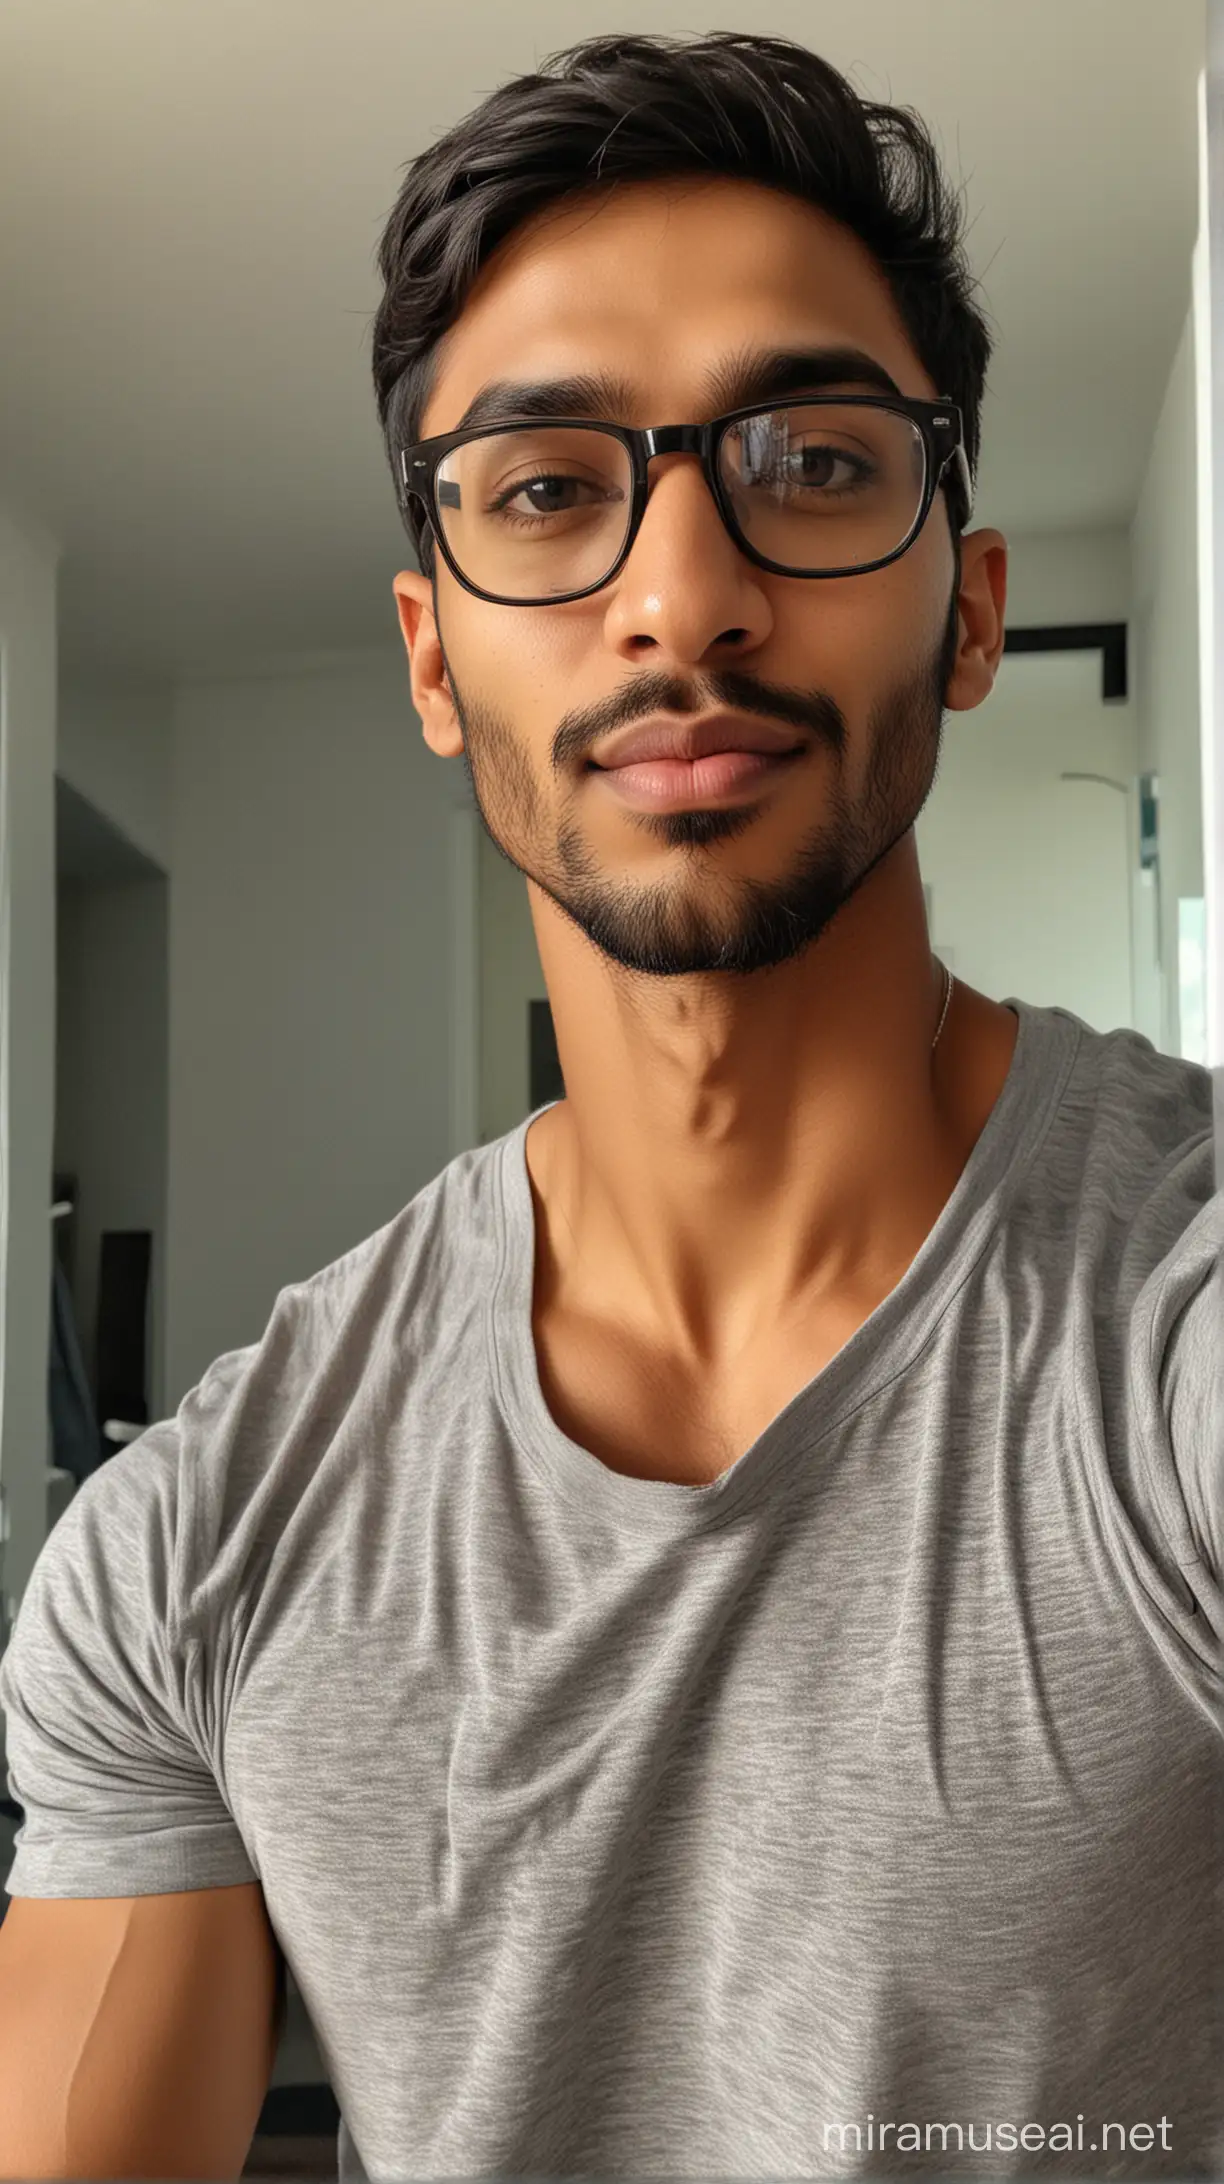 A skinny fat 24 year old dark indian male, wearing glasses,  taking mirror selfie with phone after a gym session